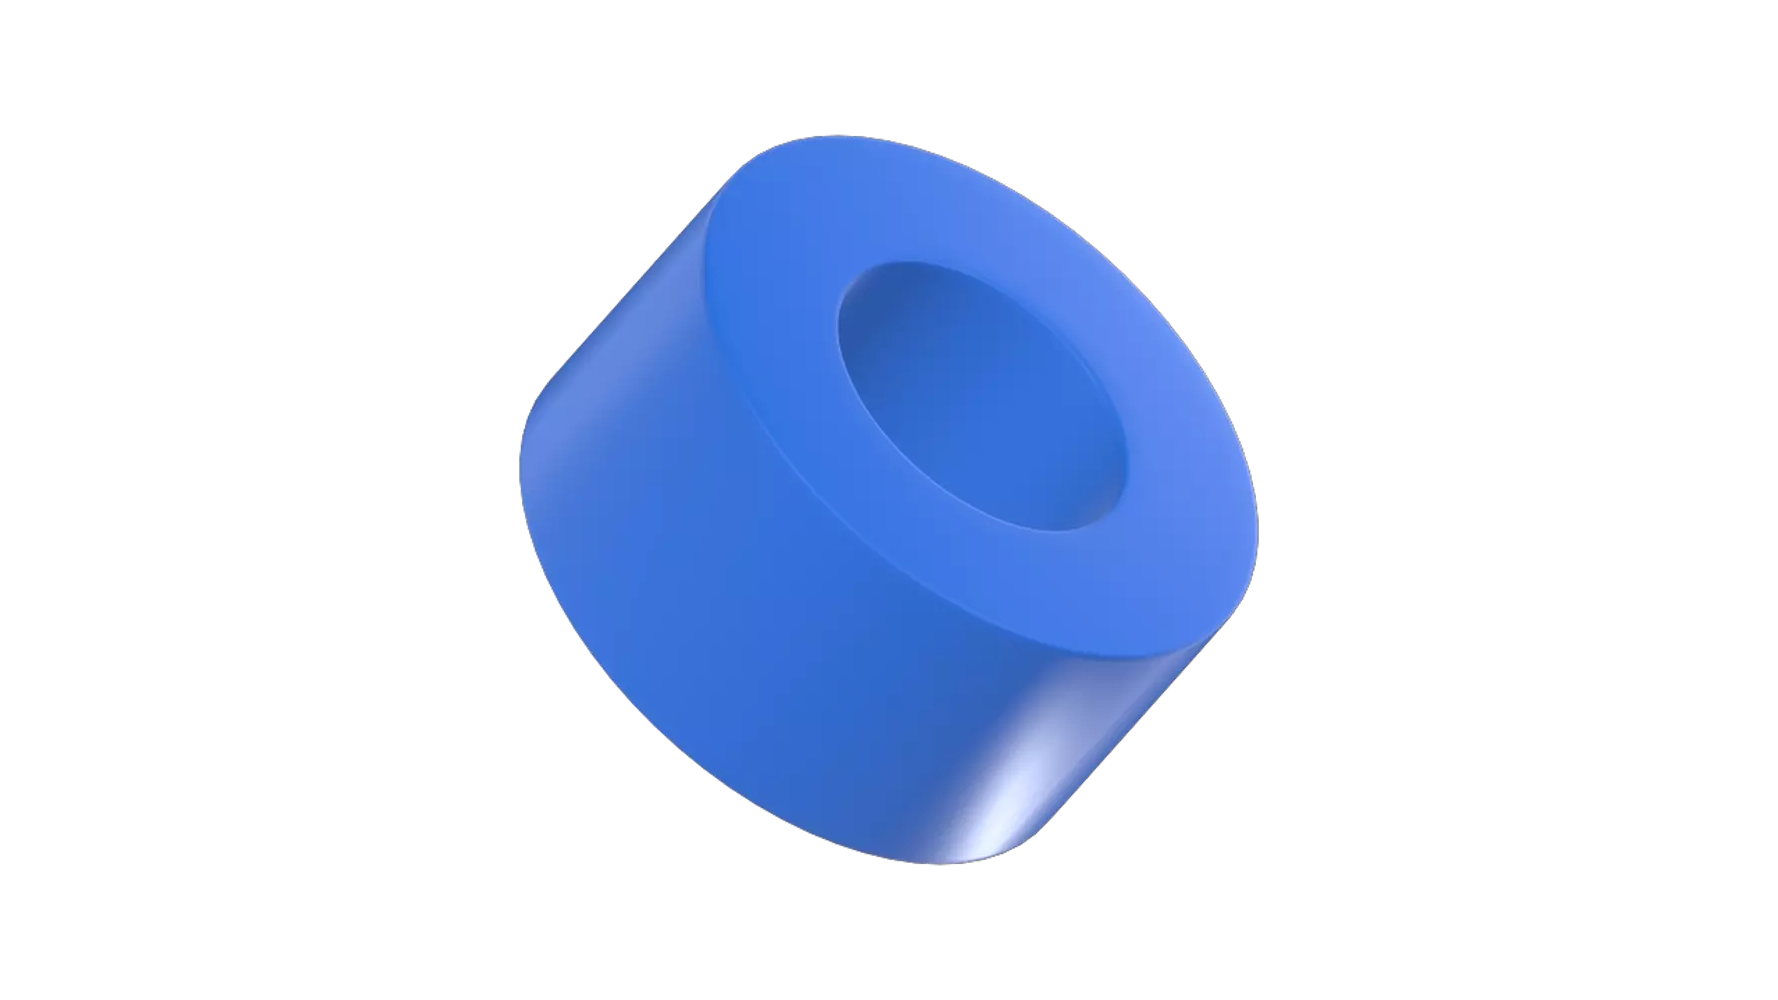 Hollow Cylinder 3D Graphic